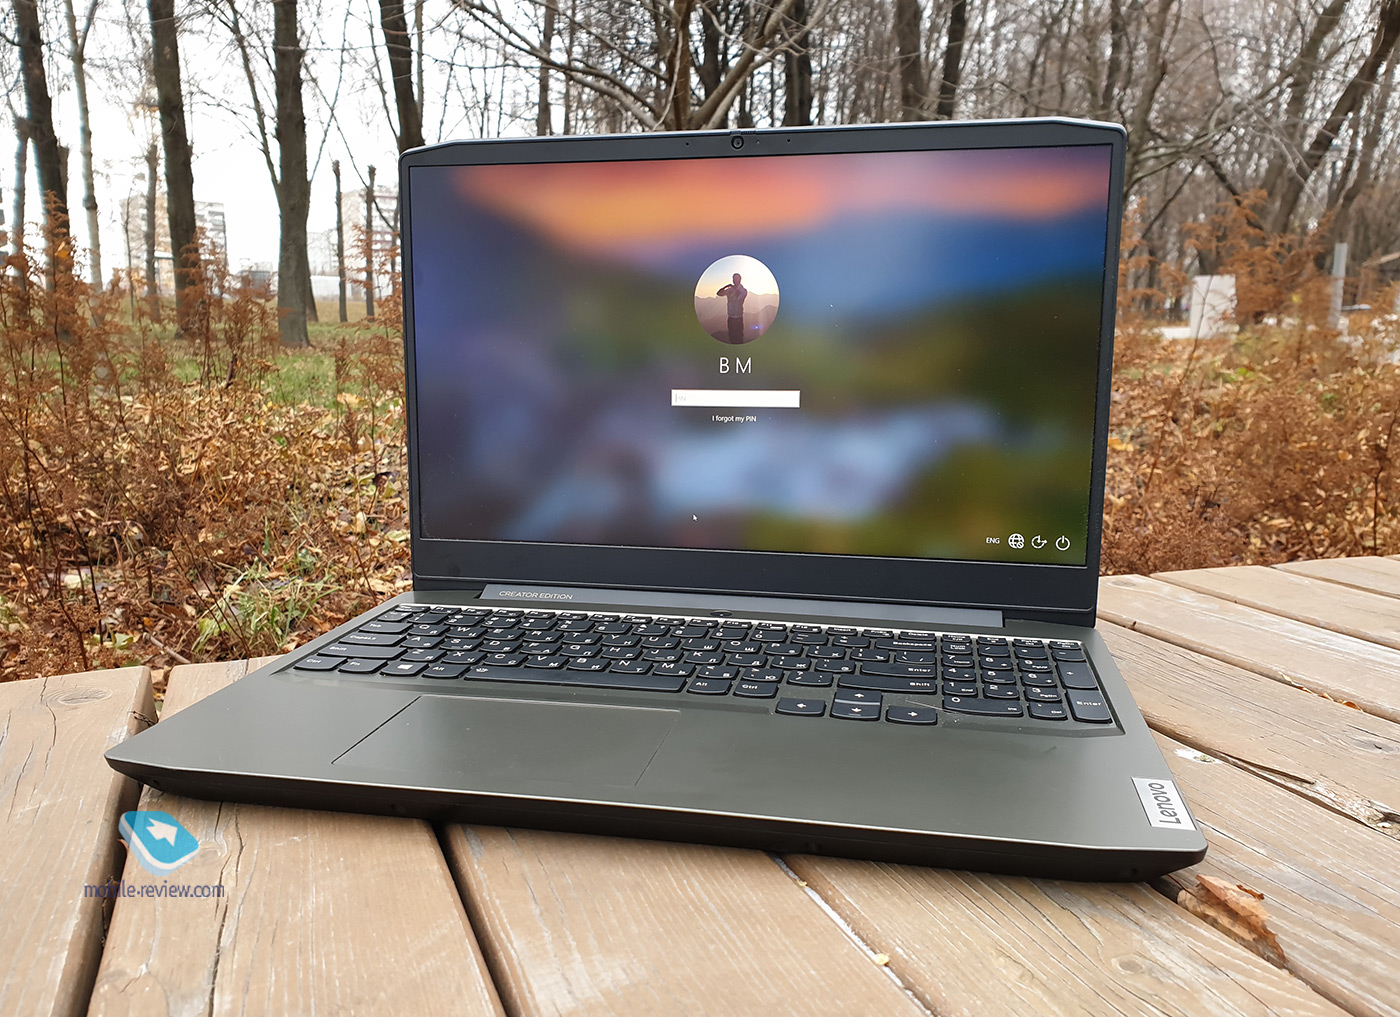 Lenovo IdeaPad Creator 5i: an affordable laptop with a high-end display